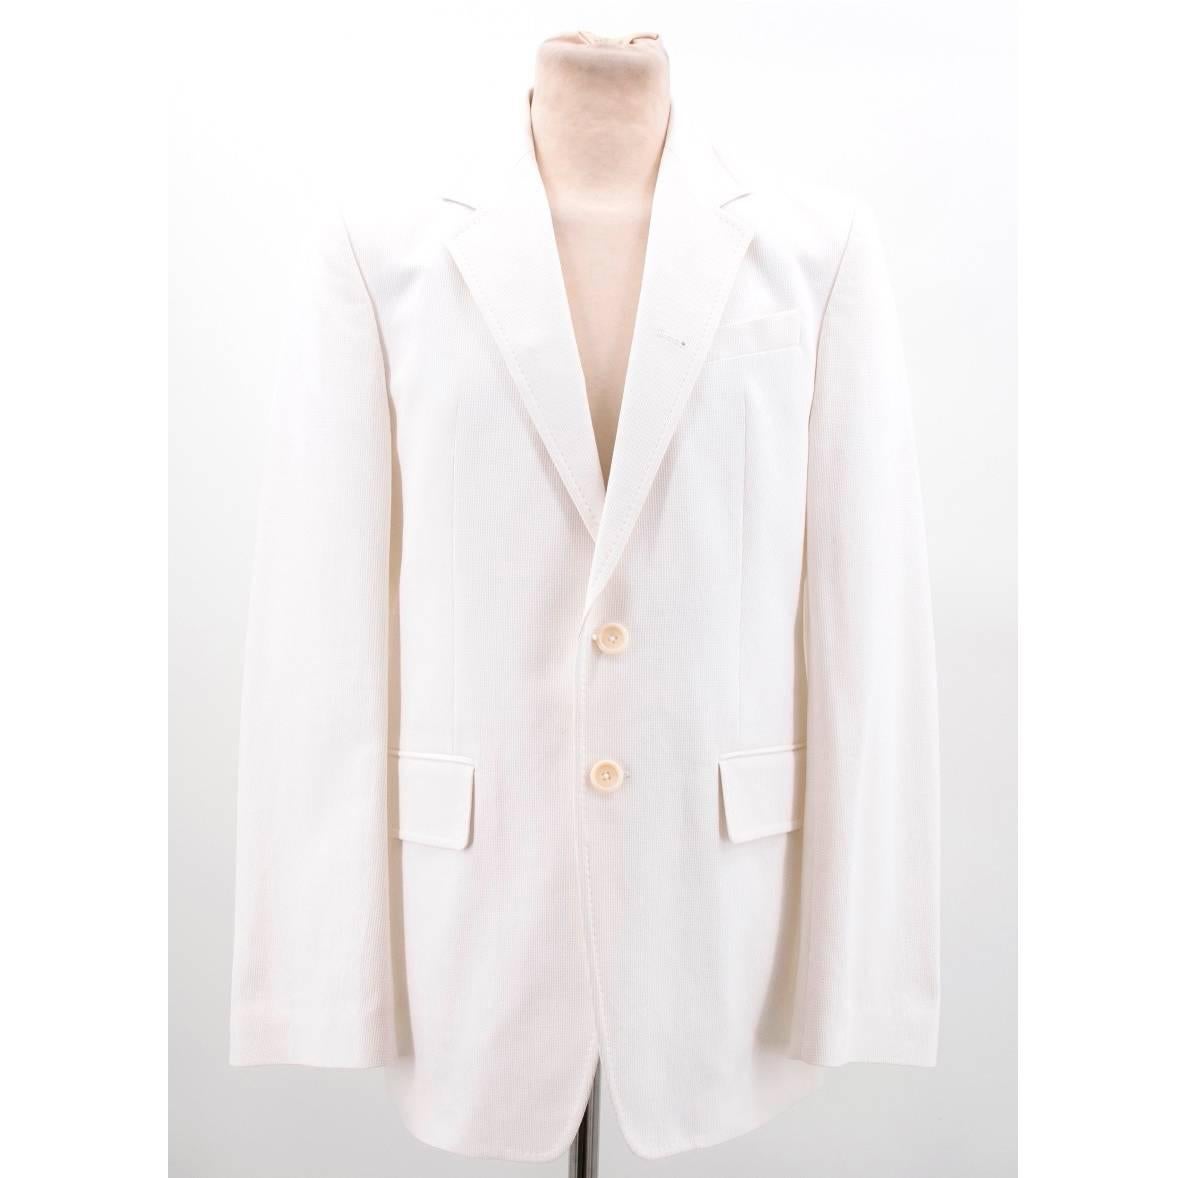 Ann Demeulemeester White Textured Suit For Sale 1